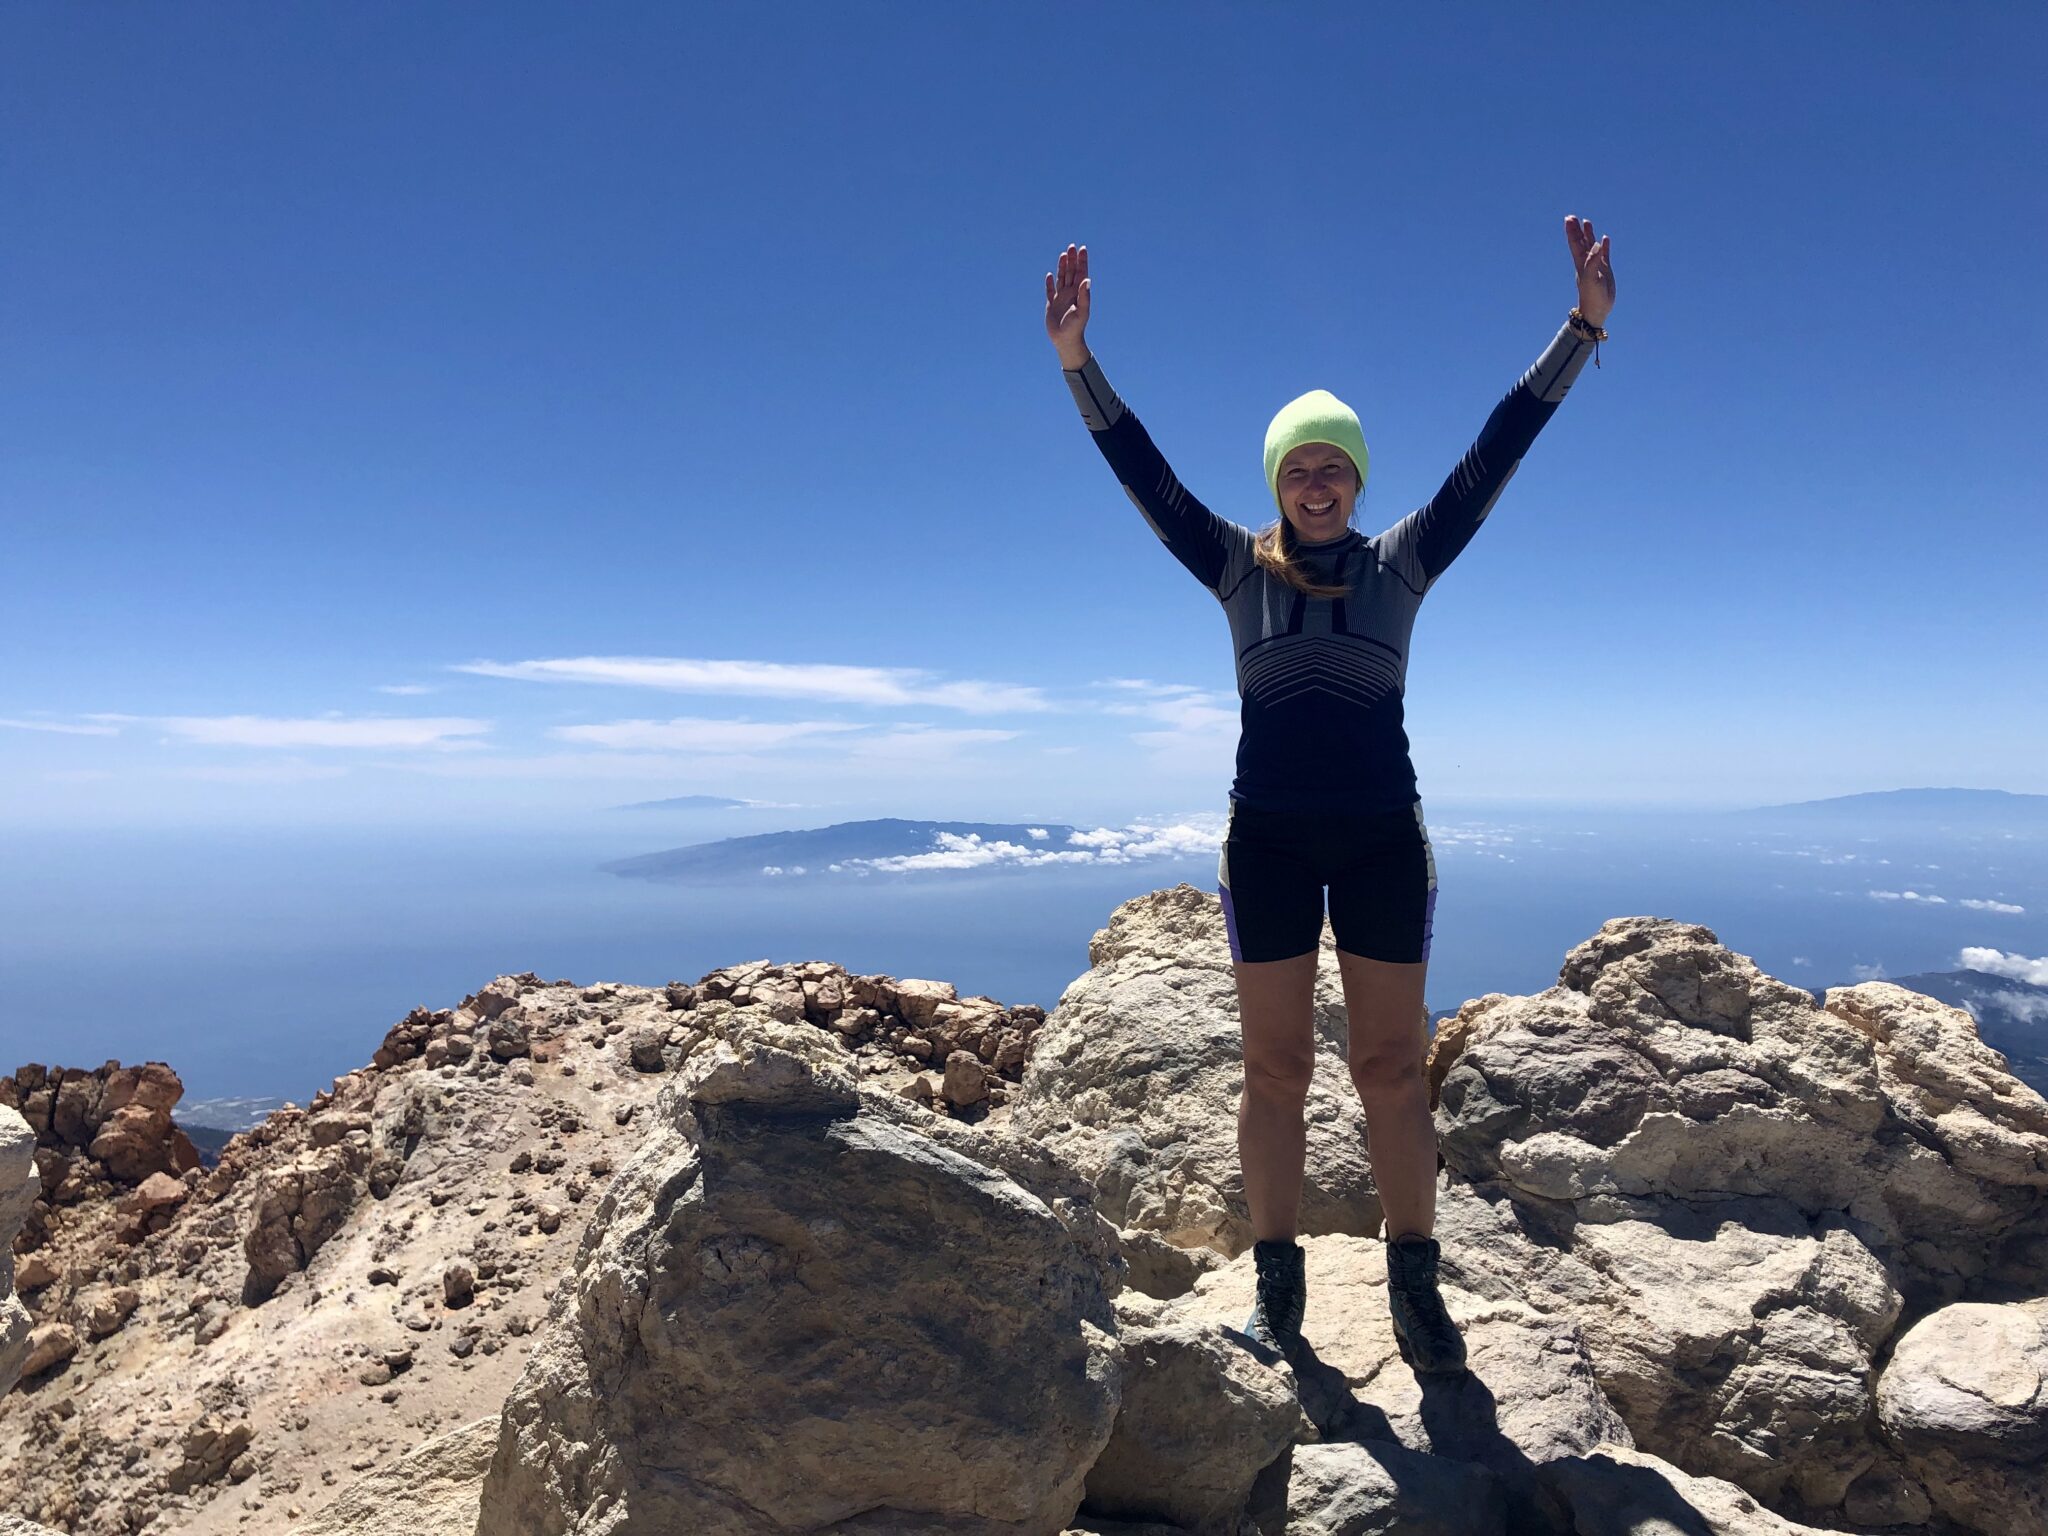 Me, finally reachng the top of Teide